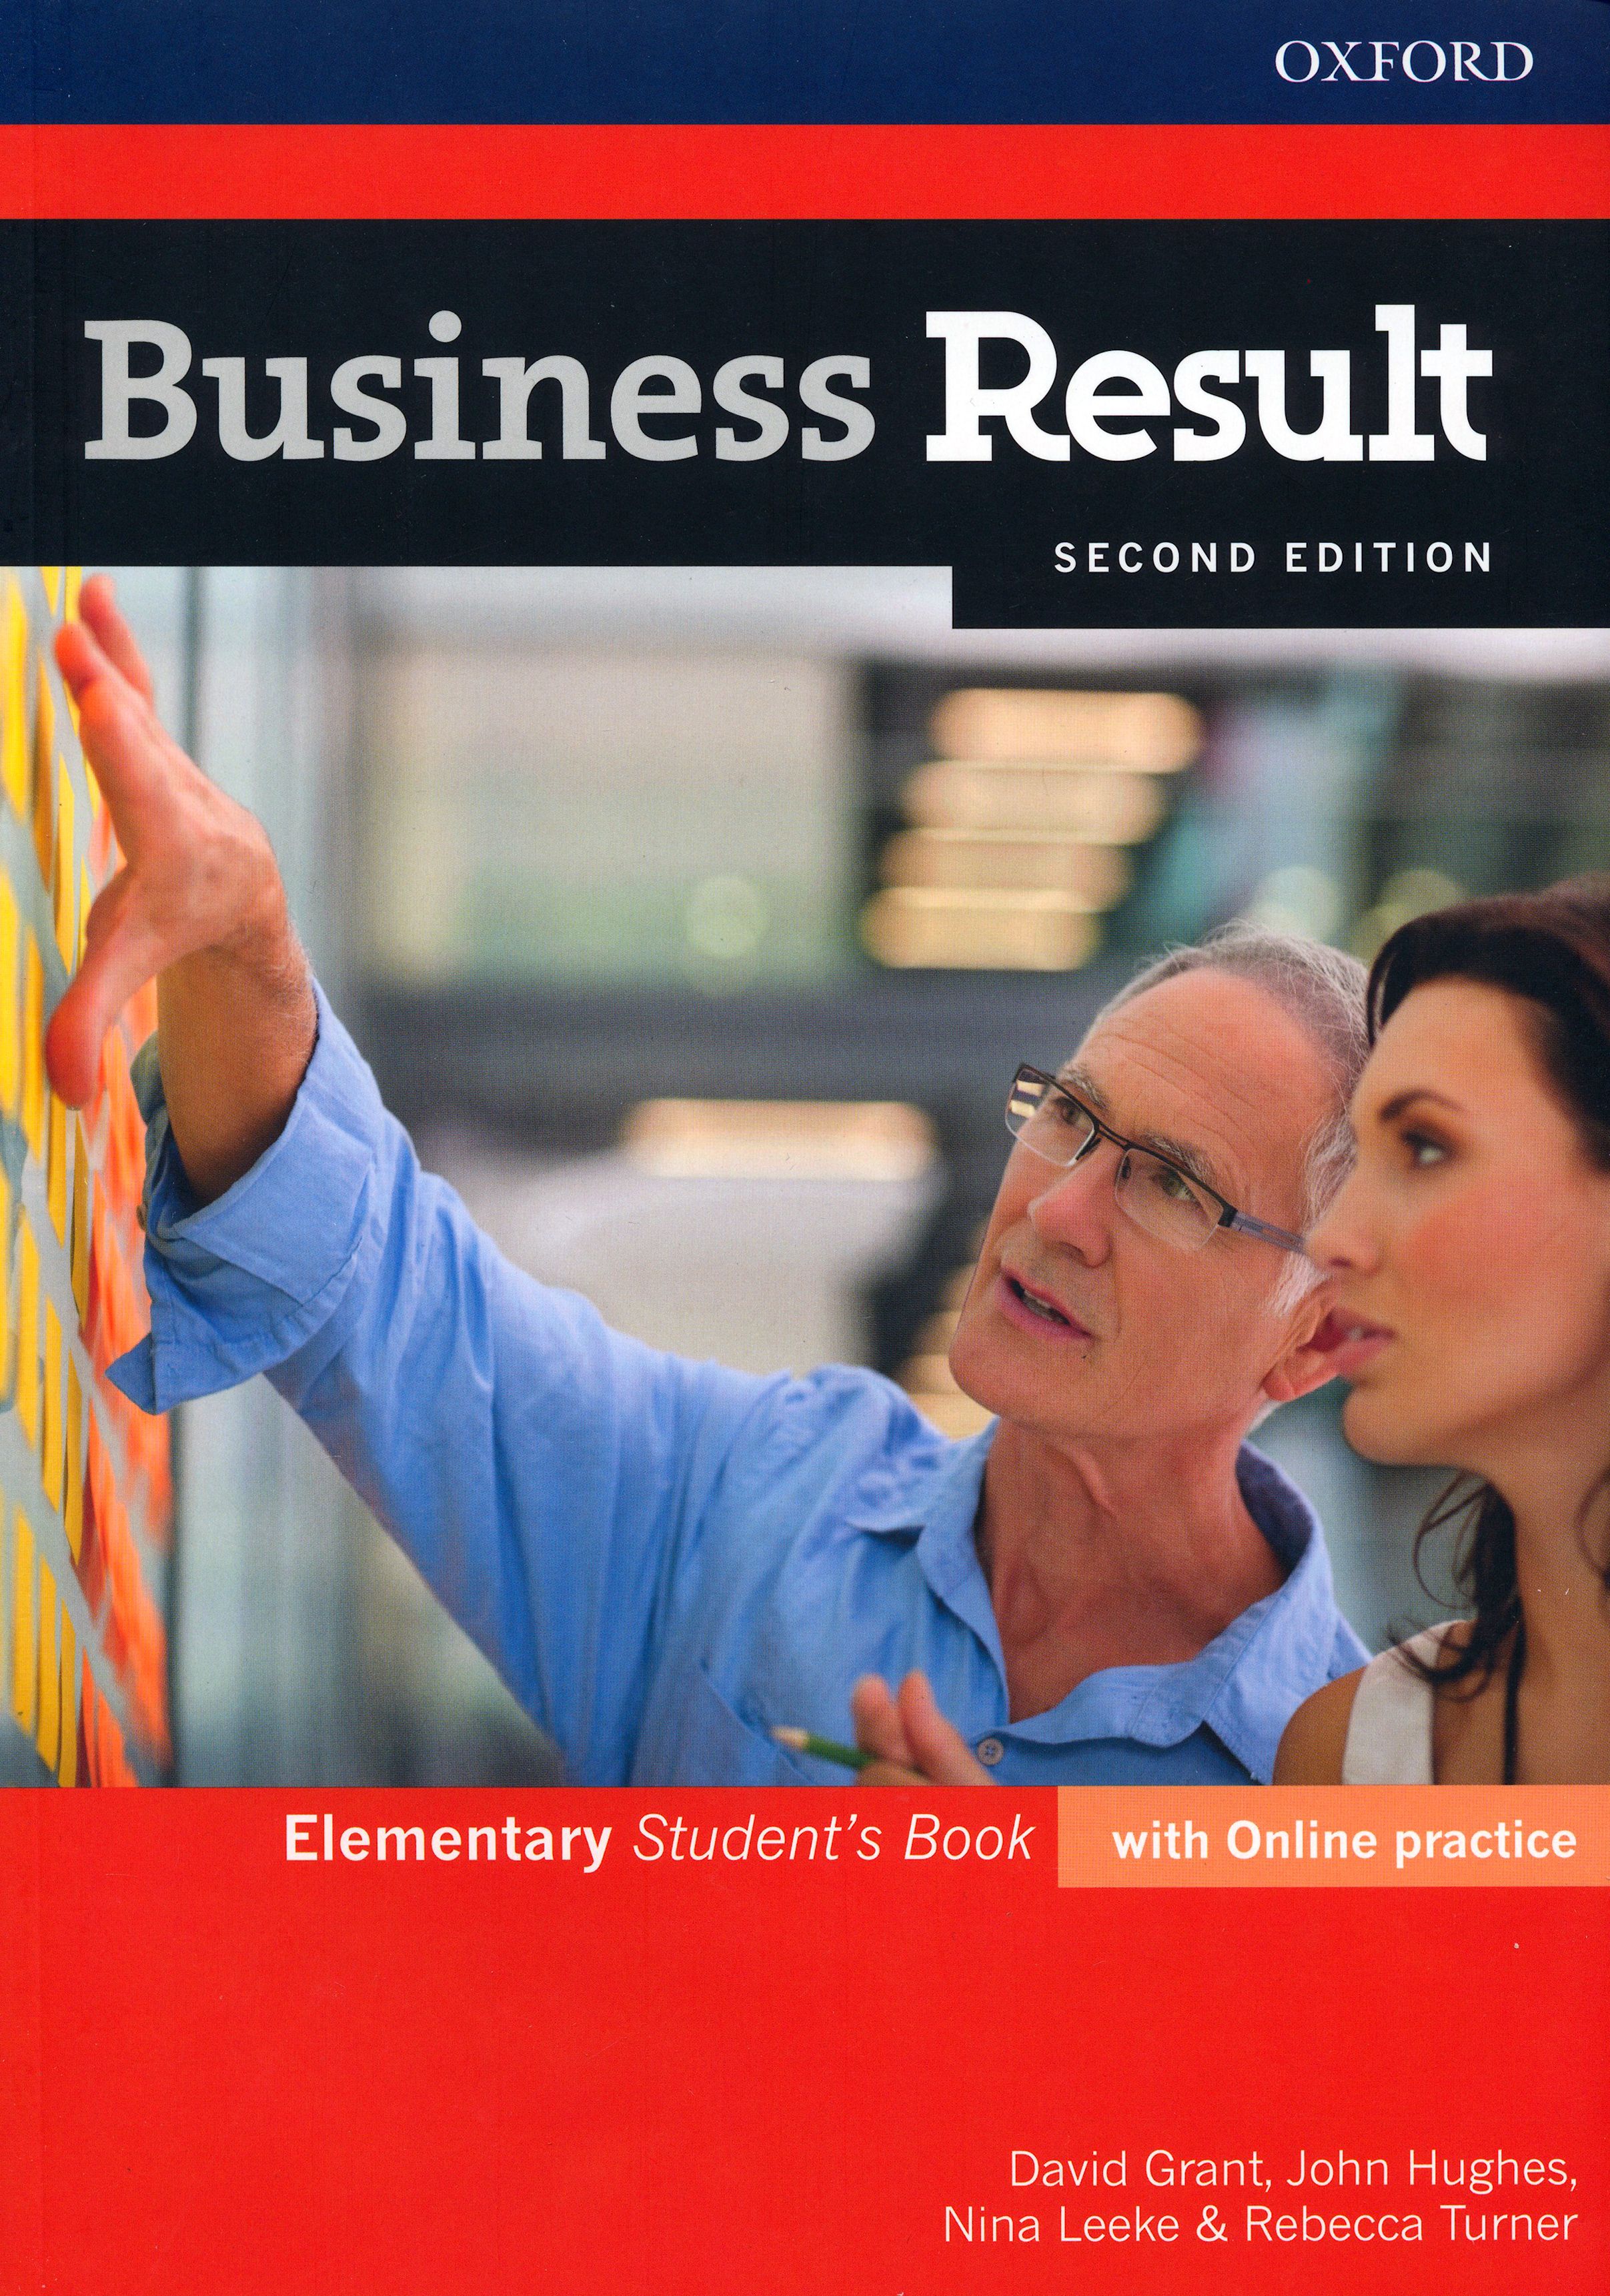 Outcomes elementary student. Oxford Business Result second Edition. Business Result Elementary. Business Result Oxford. Business Result книга.